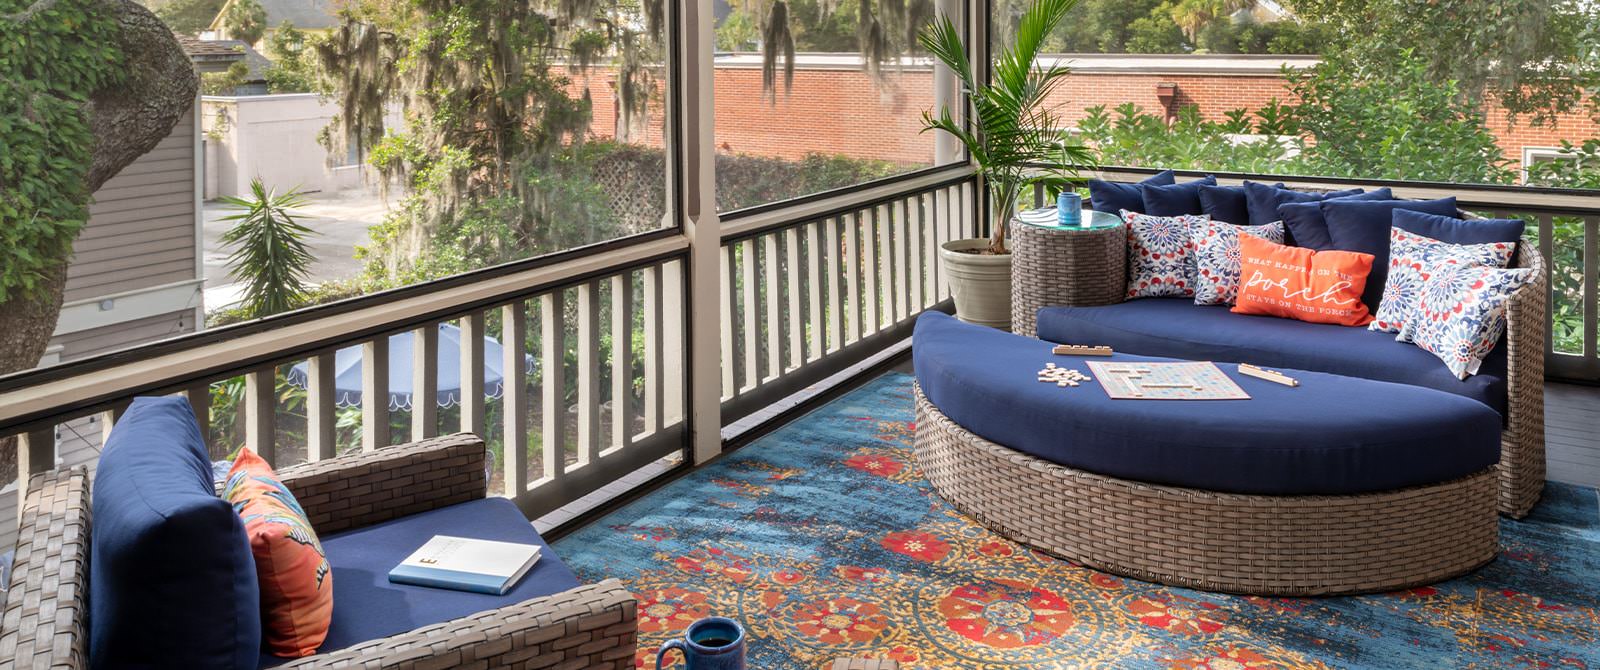 Large screened in porch on second level with light wicker patio furniture with blue fabric and large area rug